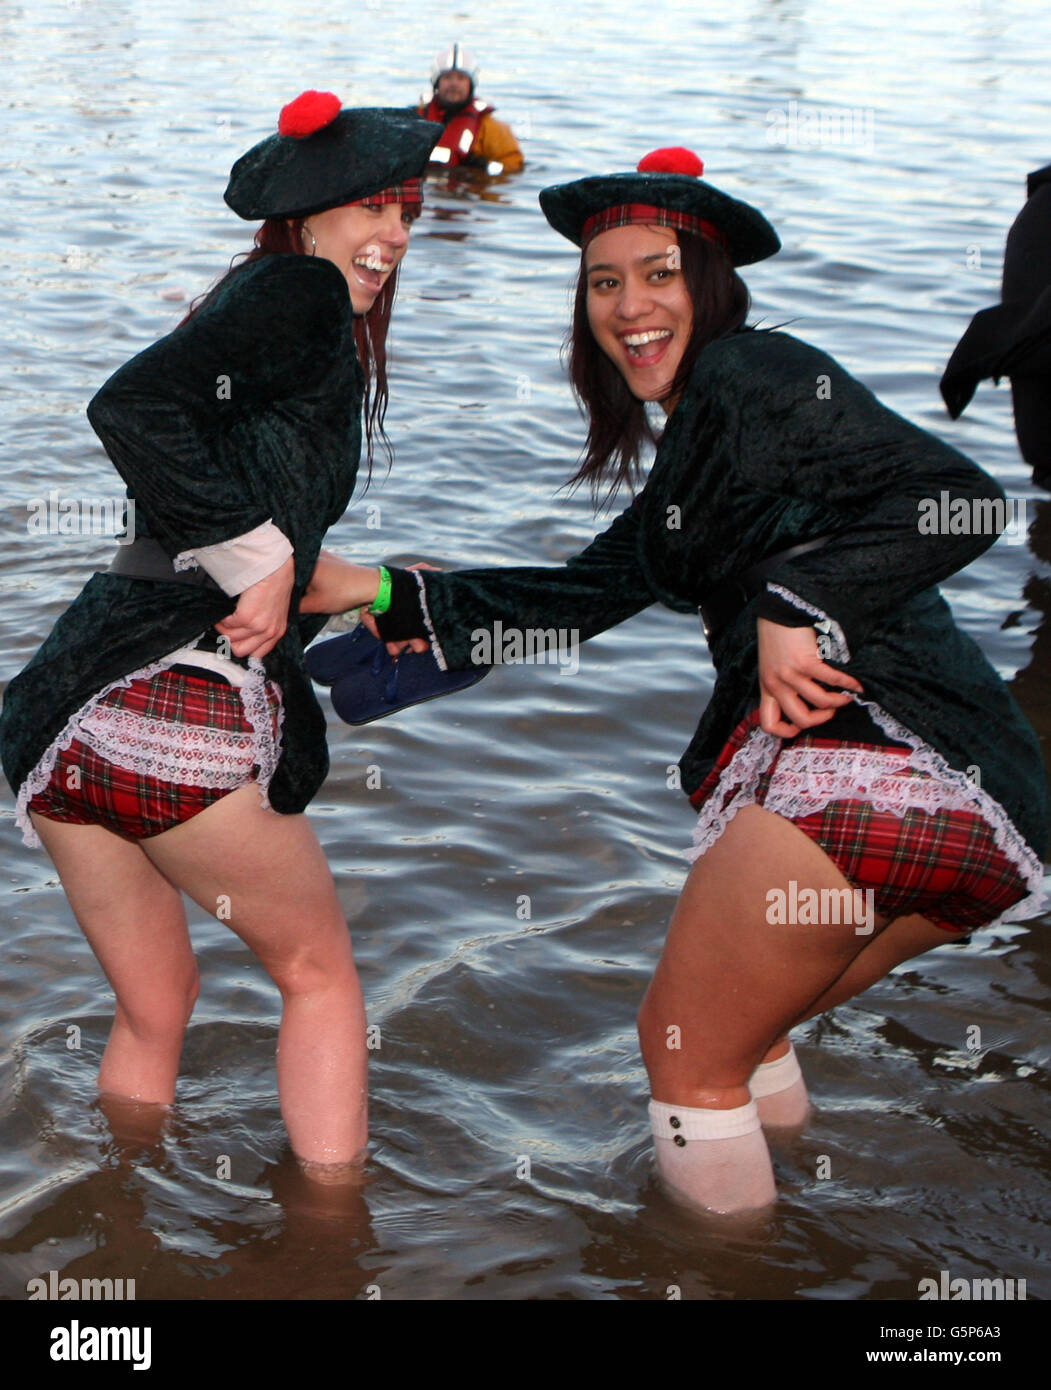 Swimmers take part in the Loony Dook New Year's Day swim in the river Forth near the Forth Rail Bridge. Stock Photo